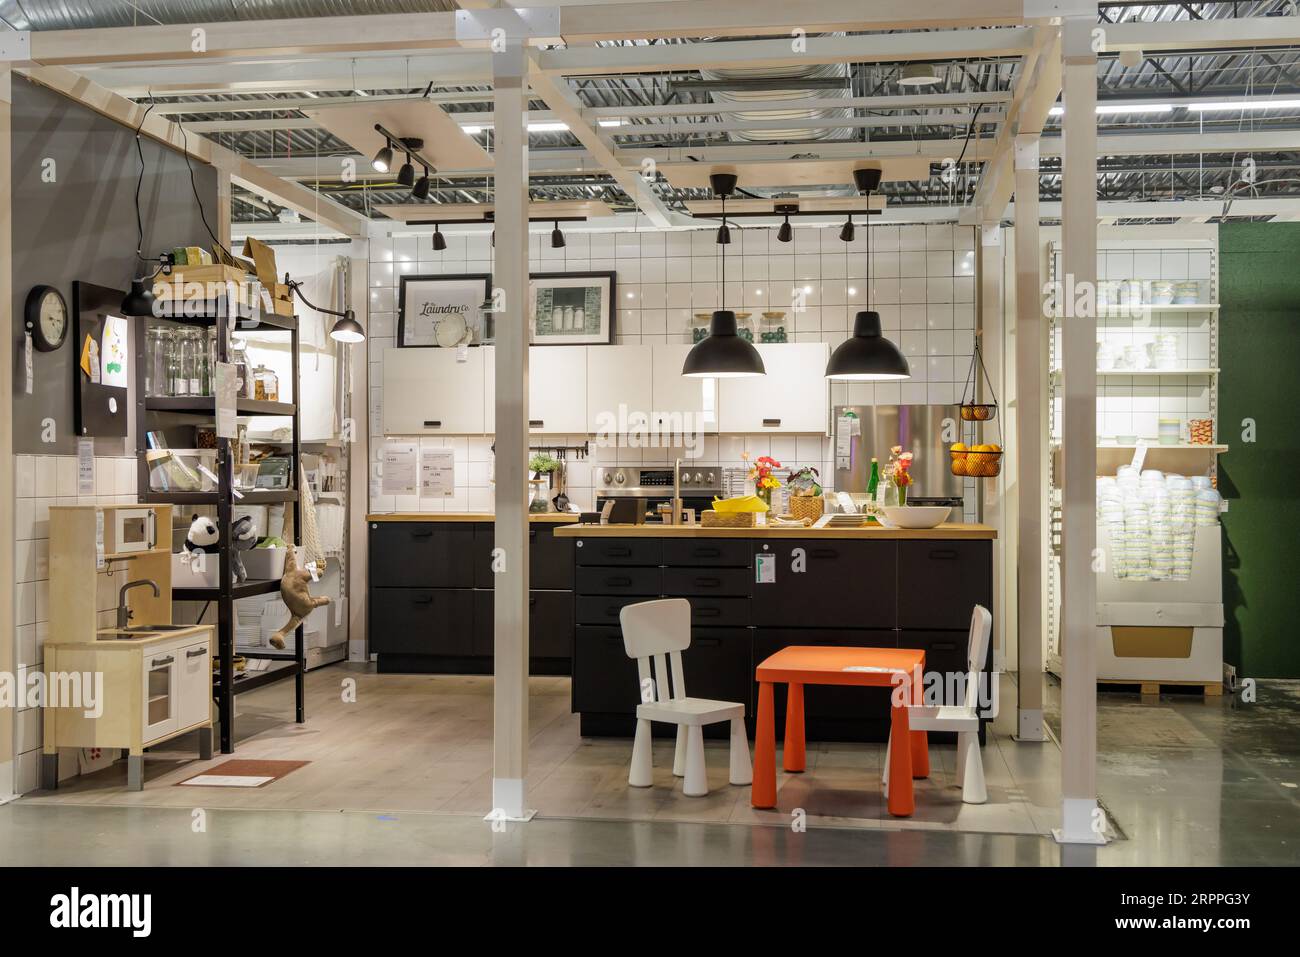 Full kitchen display in the showroom section of IKEA home store Stock Photo